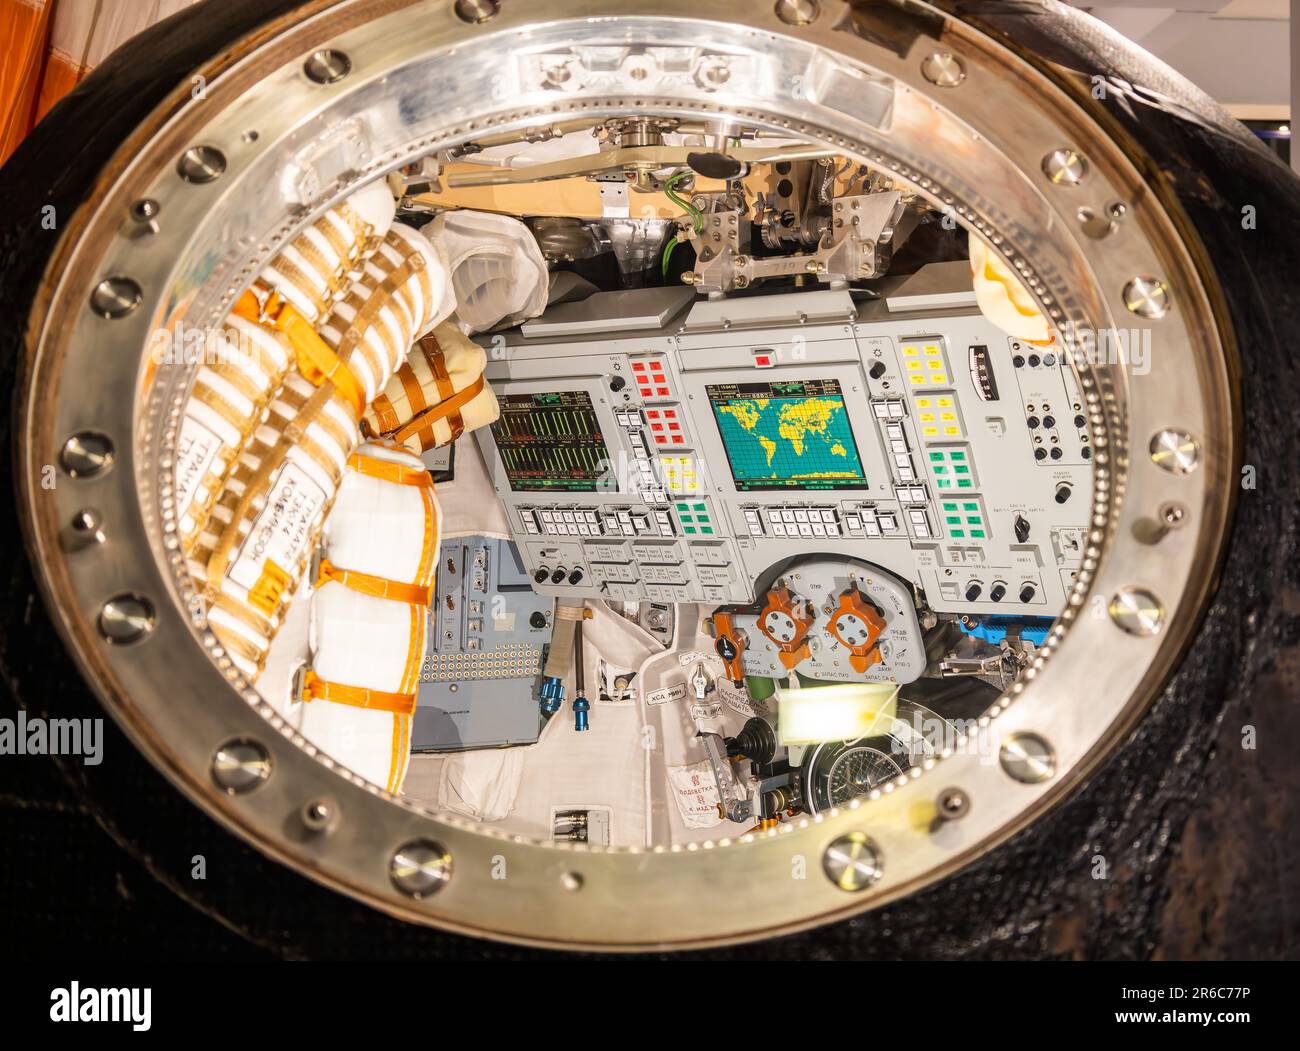 London, UK - May 2023: Interior view of the spacecraft Soyuz TM-14 exhibited inside of the Science Museum of London, United Kingdom Stock Photo